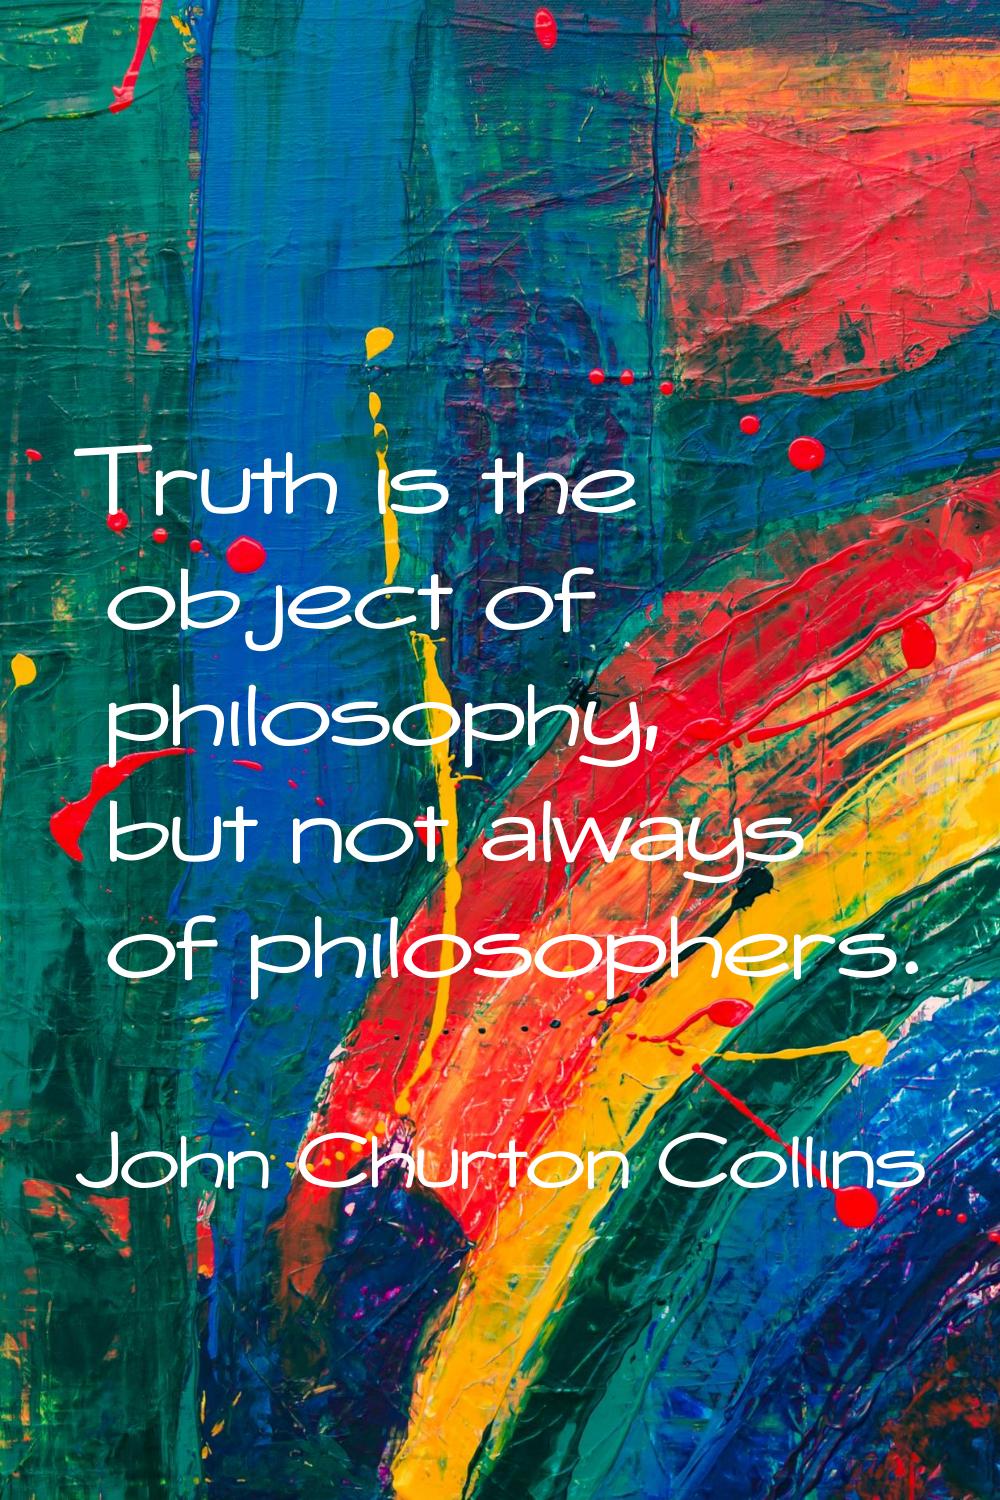 Truth is the object of philosophy, but not always of philosophers.